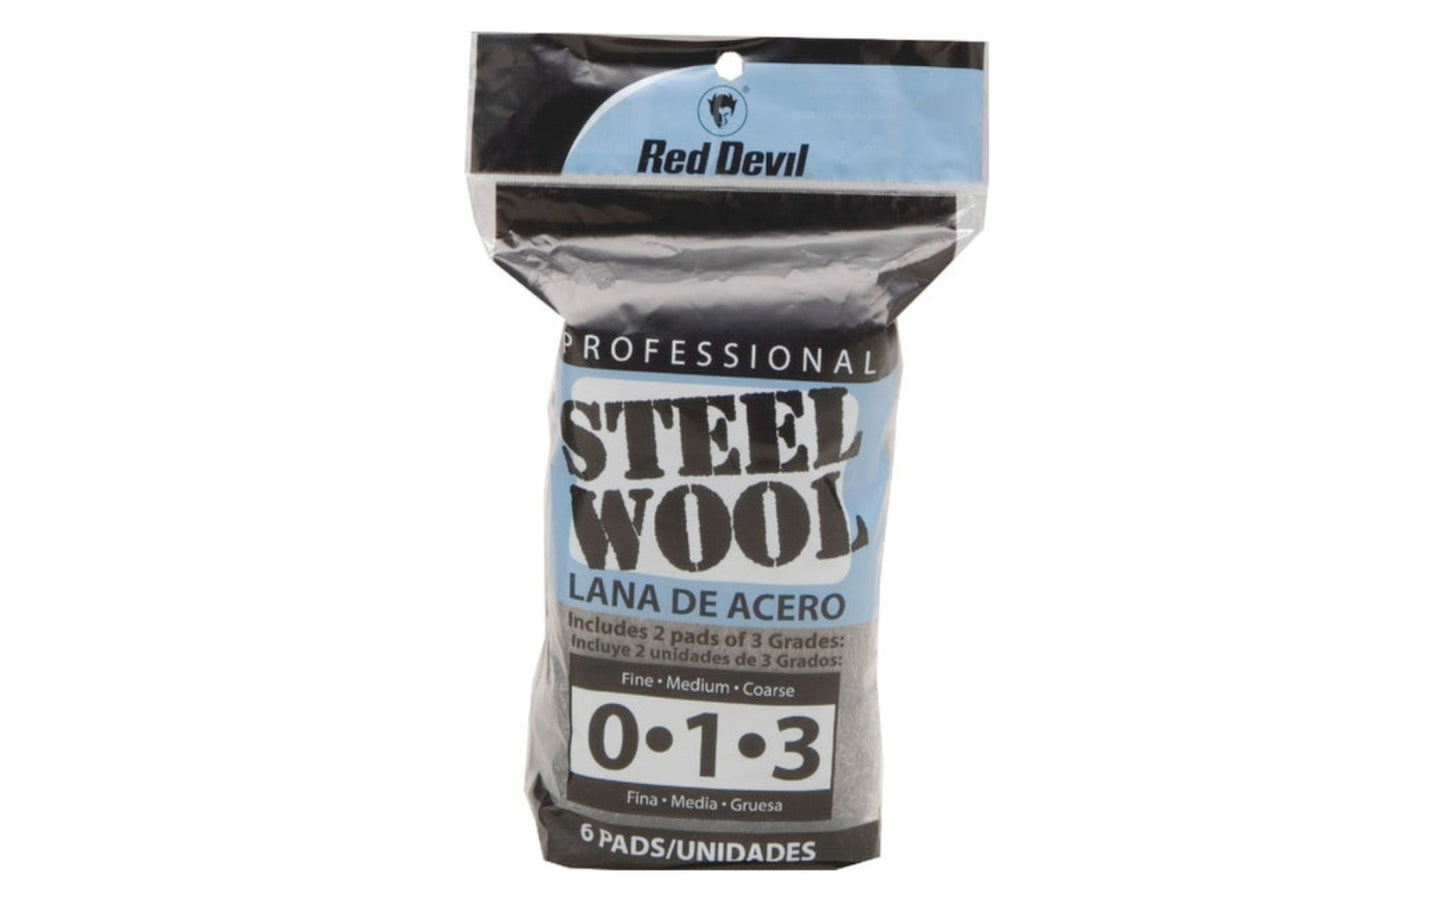 Red Devil Assortment of Steel Wool - 6 Pack. Ideal for a wide range of projects, hobbies, workshop, tools, household use, etc Use for smoothing & finishing, surface preparation & general purpose use. Assortment pack contains (2) #0 Fine, (2) #1 Medium, (2) #3 Coarse. Made by Red Devil, Inc.